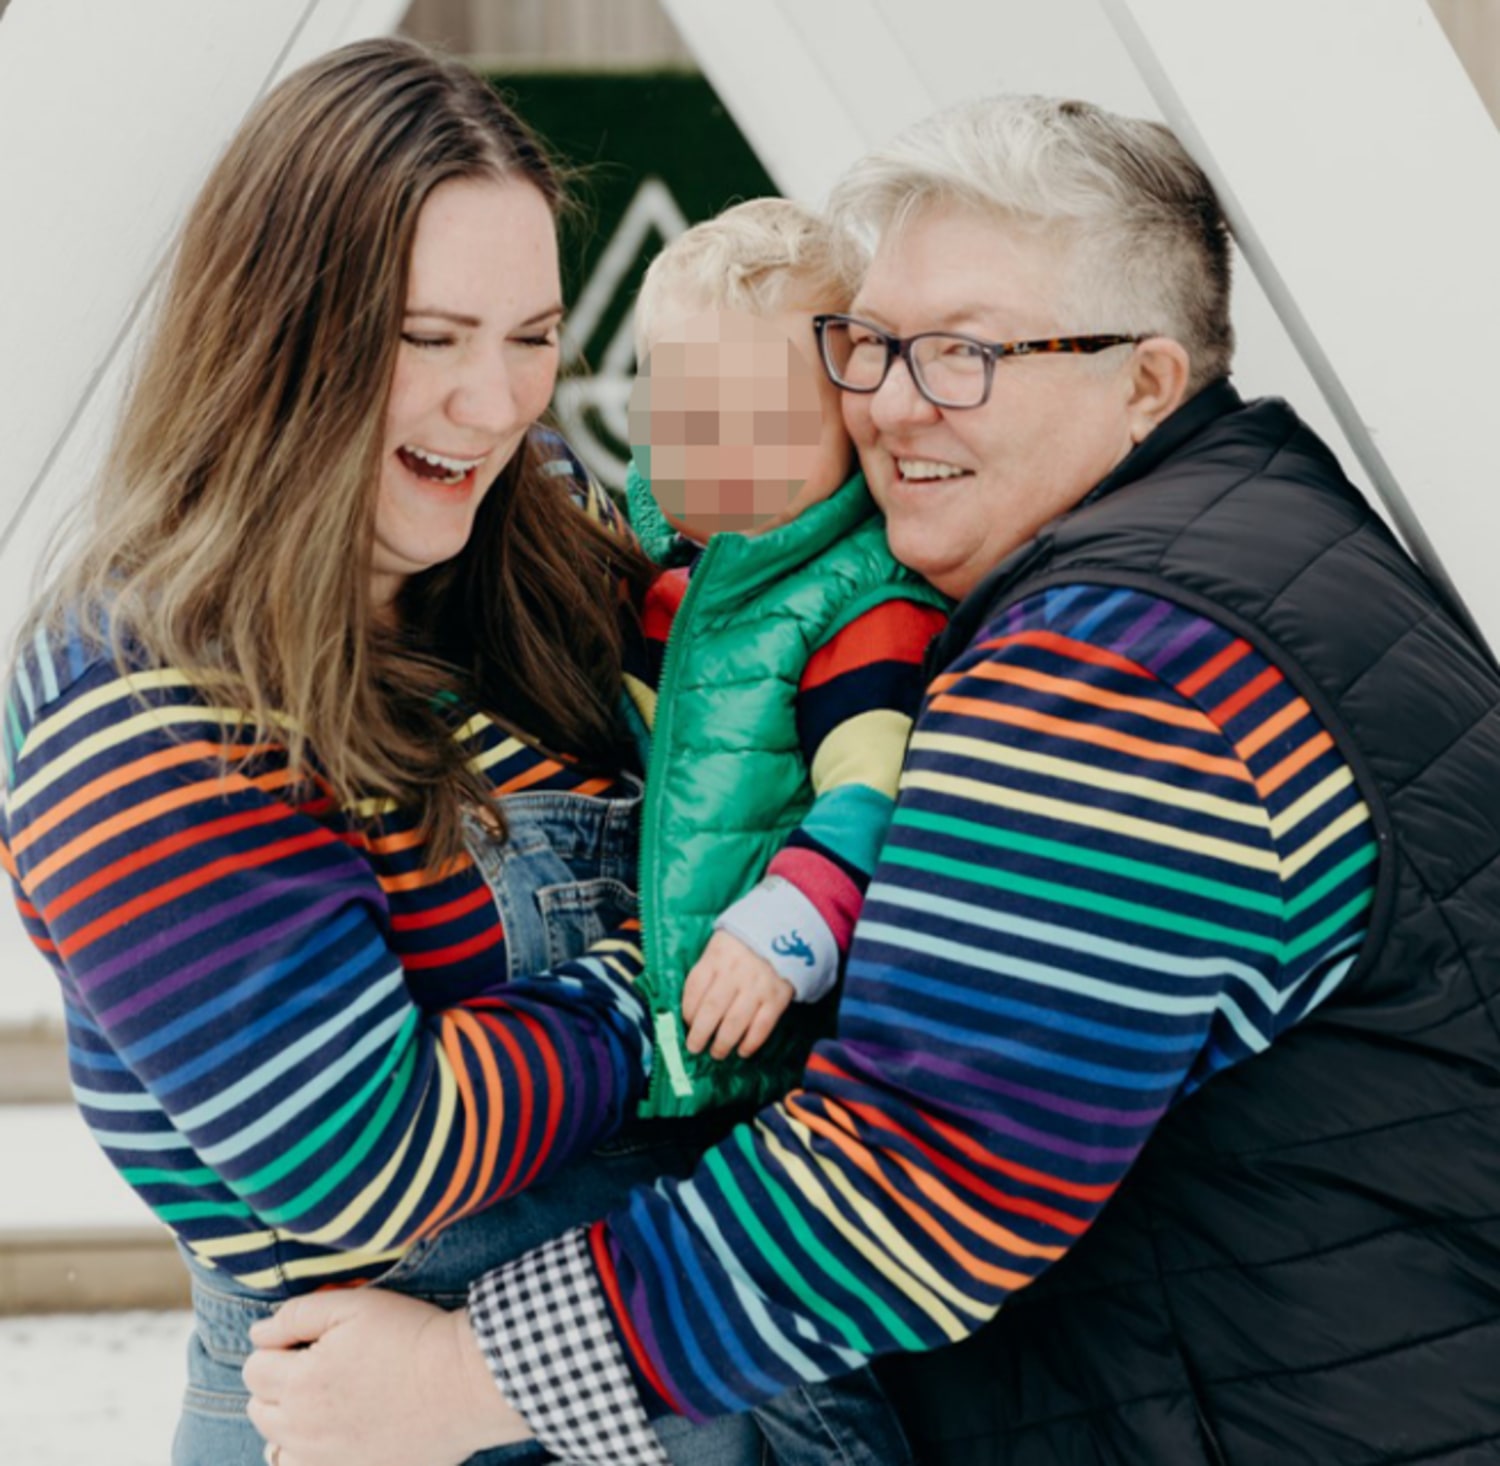 Lesbian mom loses parental rights, and wife, to sperm donor